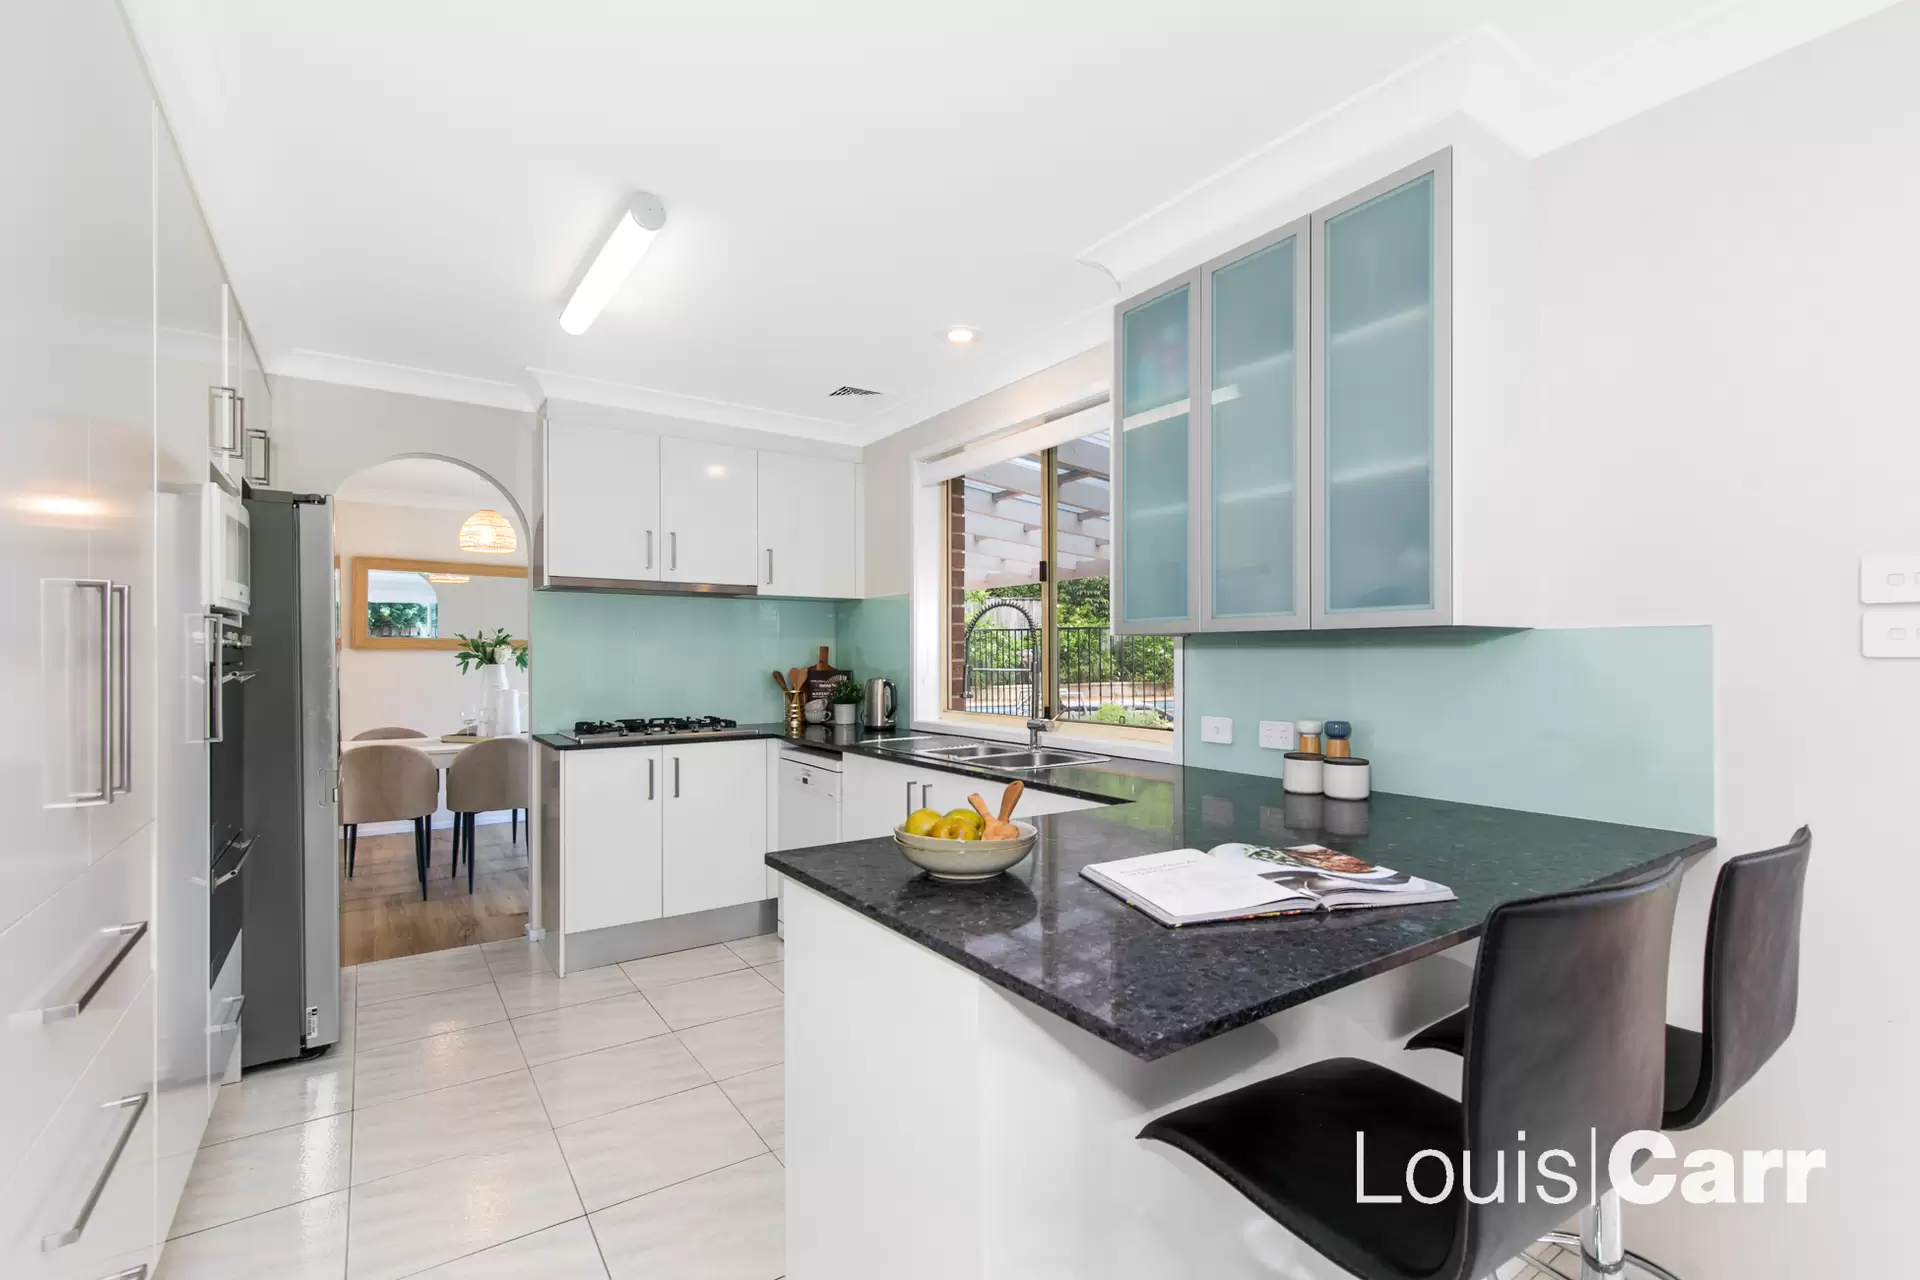 Photo #5: 4 Bowen Close, Cherrybrook - Sold by Louis Carr Real Estate